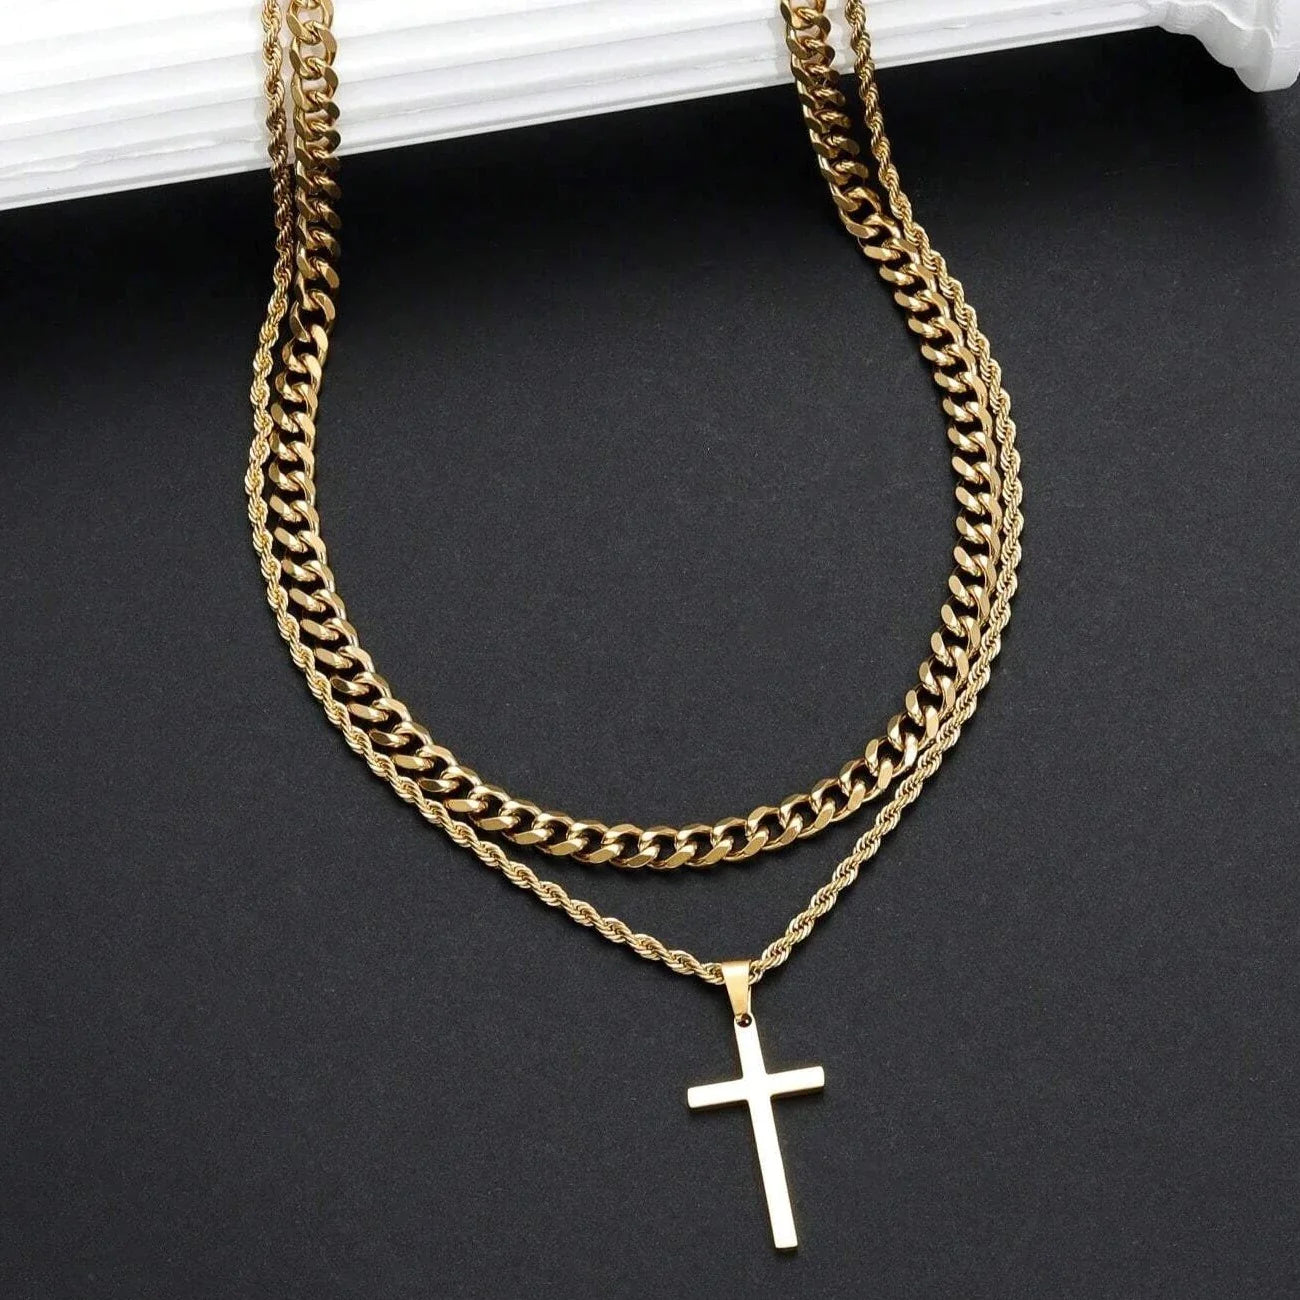 Silver Double Sided Thick Cross Necklace: Iron Chain – Simply Gorgeous